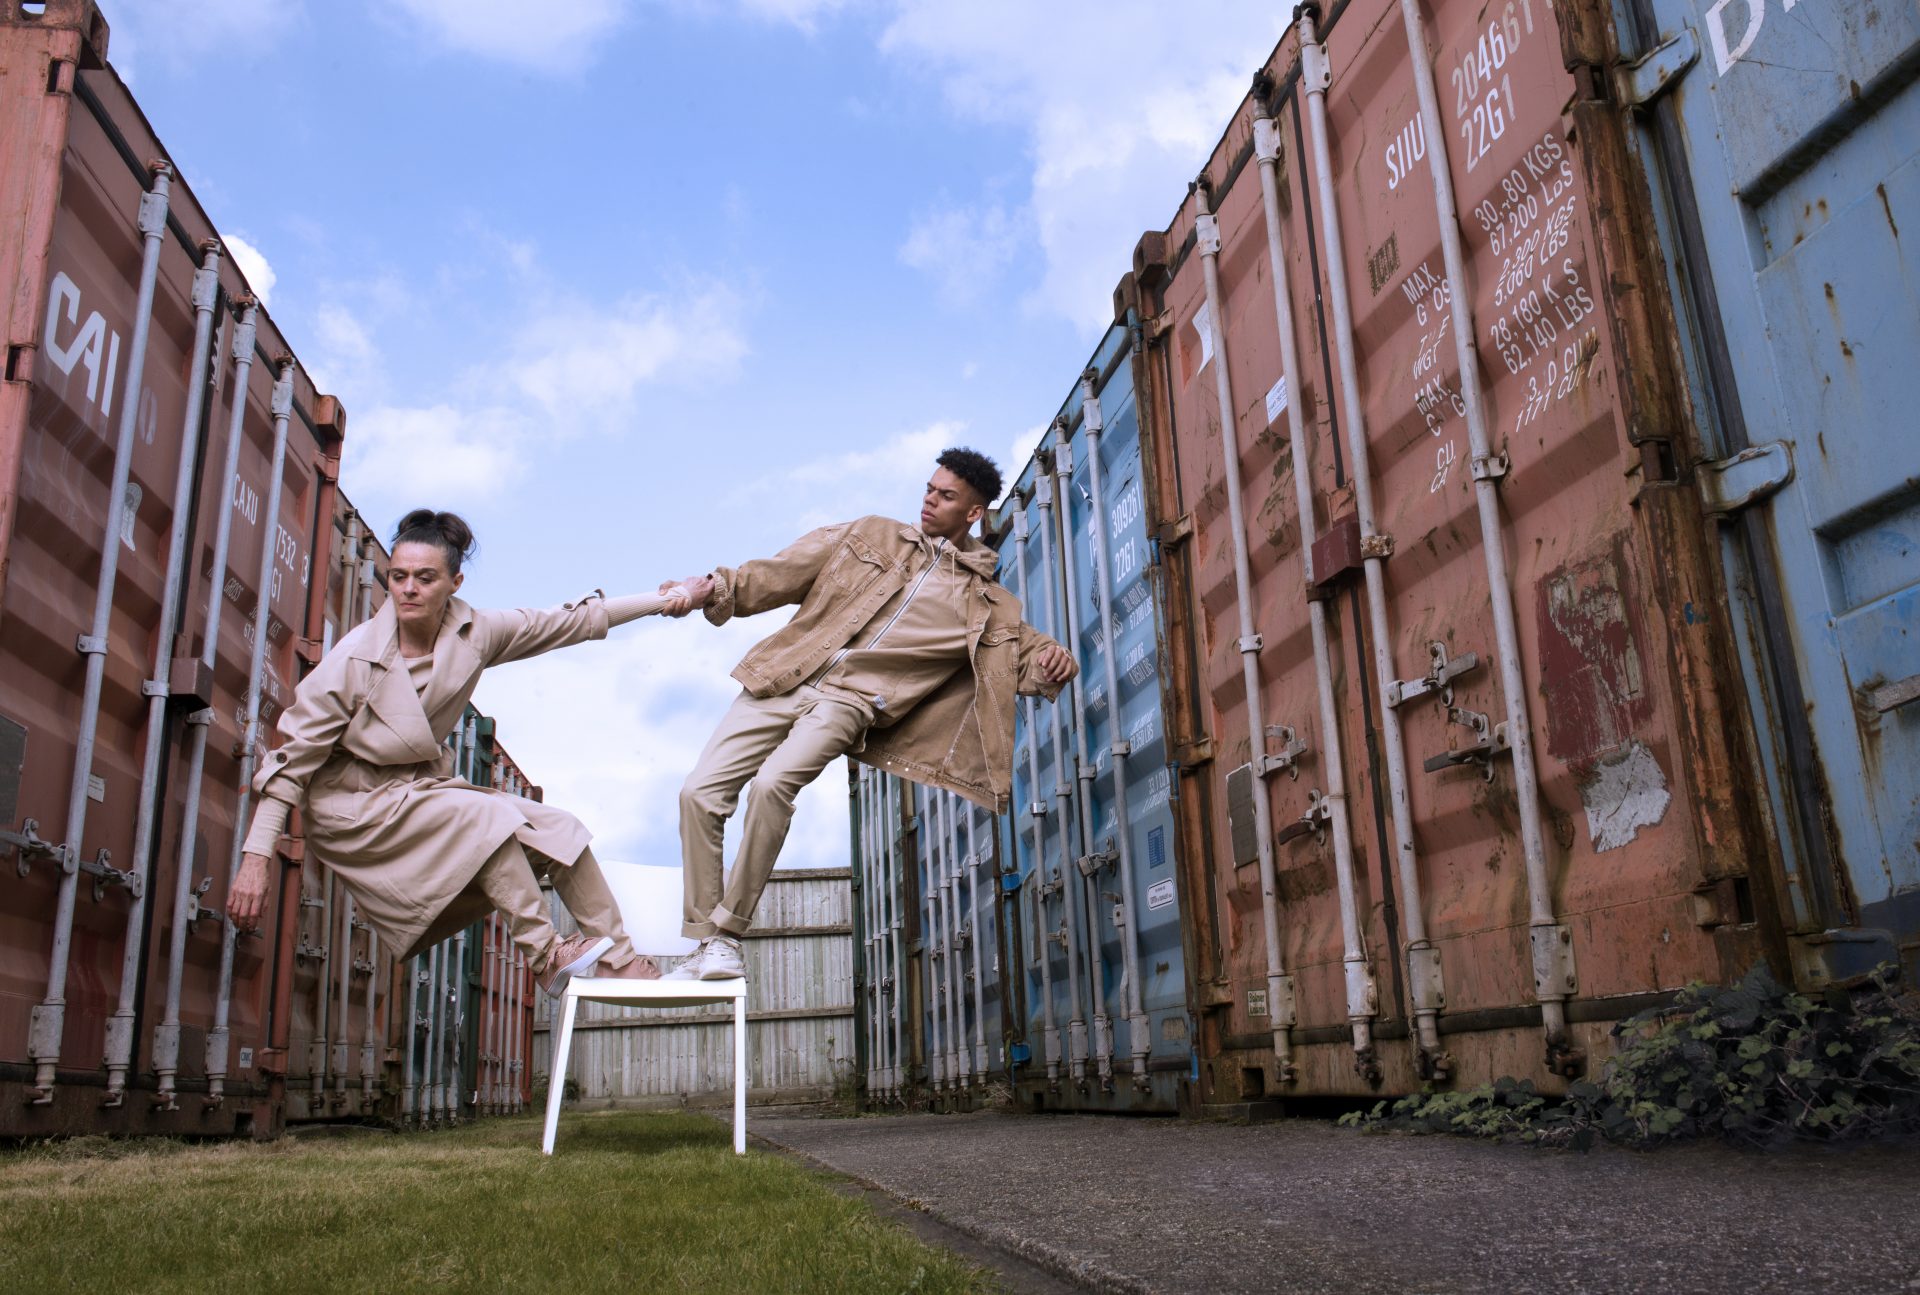 Two dancers hold hands while balancing on a chair. They are surrounded by industrial storage units.